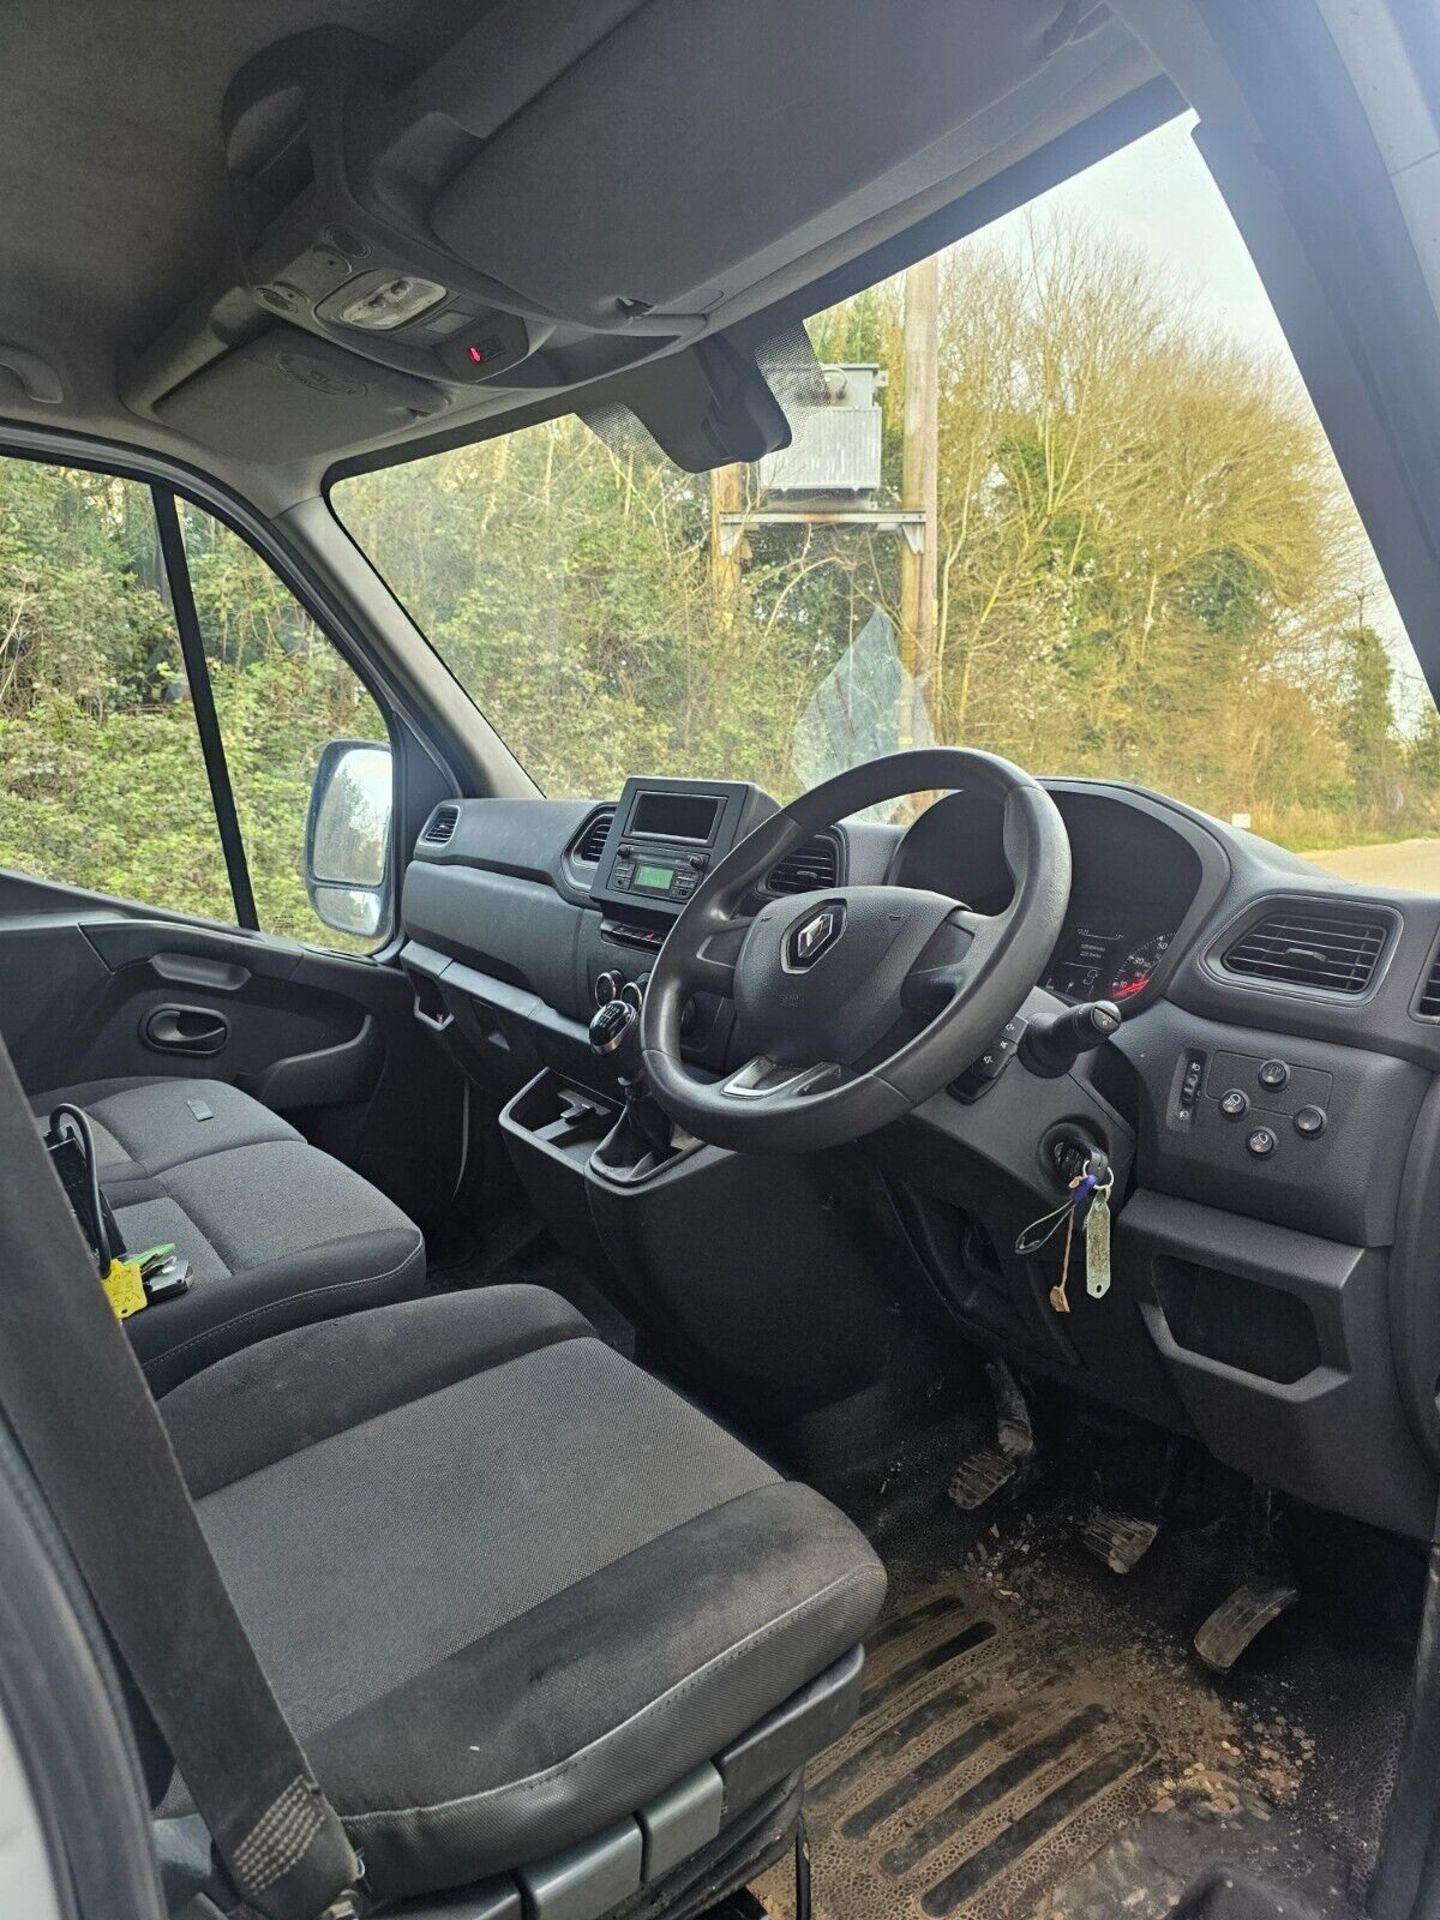 2019 RENAULT MASTER BUSINESS PLUS, FULLY LOADED - Image 5 of 5